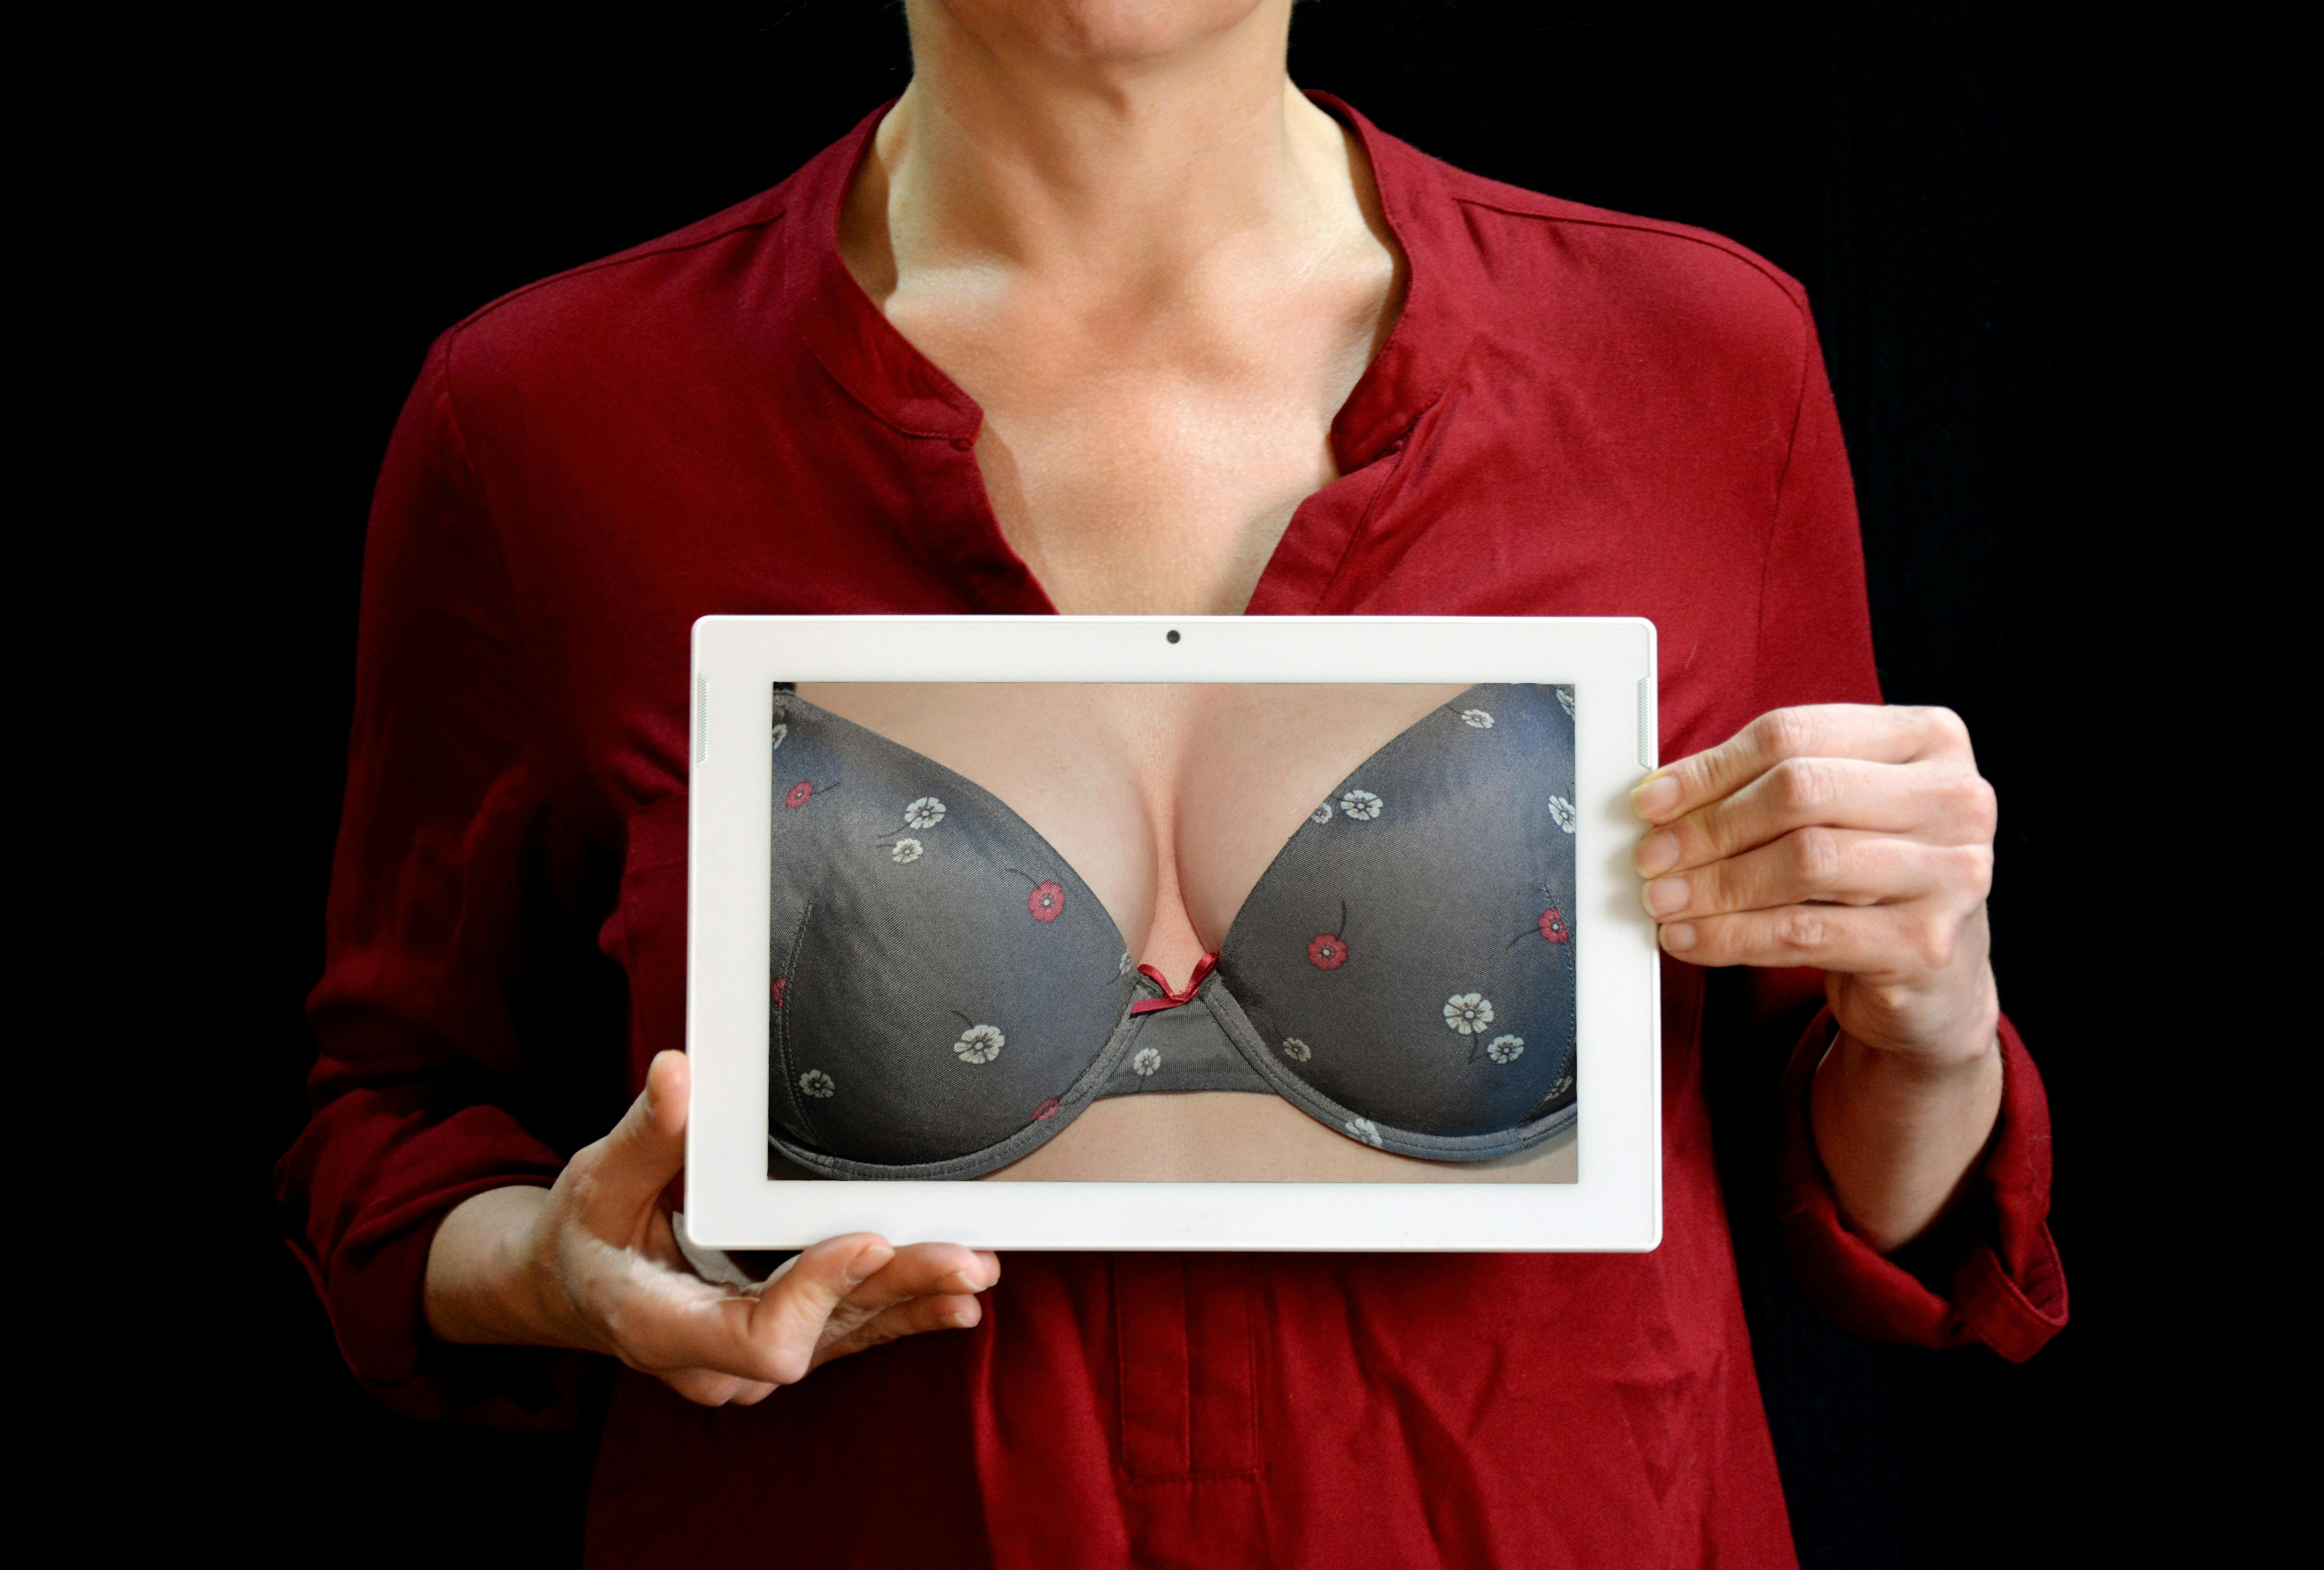 Different Breast Size Royalty-Free Images, Stock Photos & Pictures